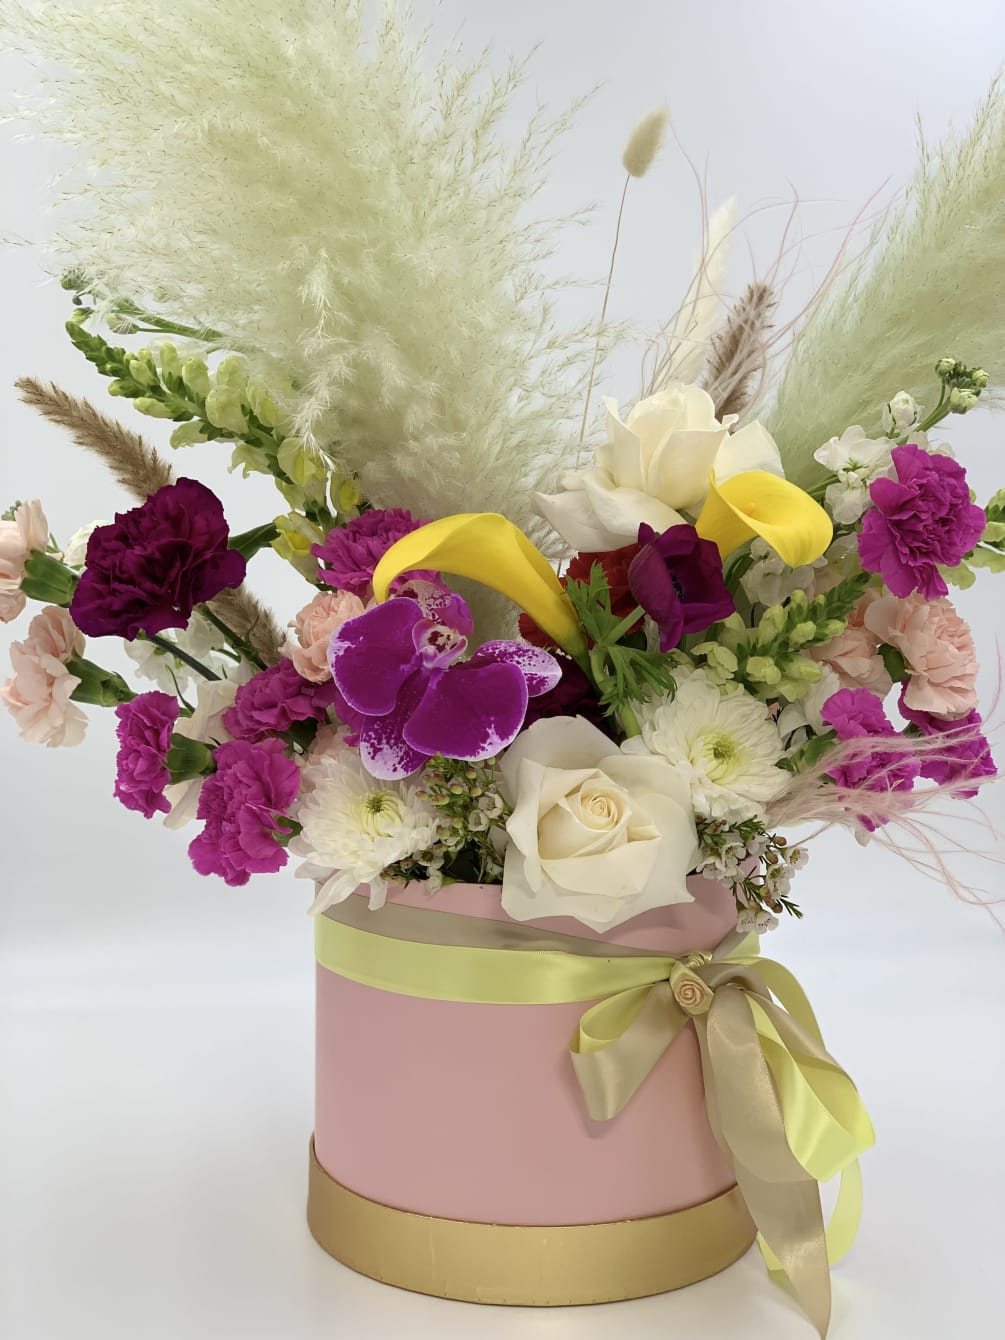 Fresh mixed flowers including pampas grasses, you may choose your own colors.